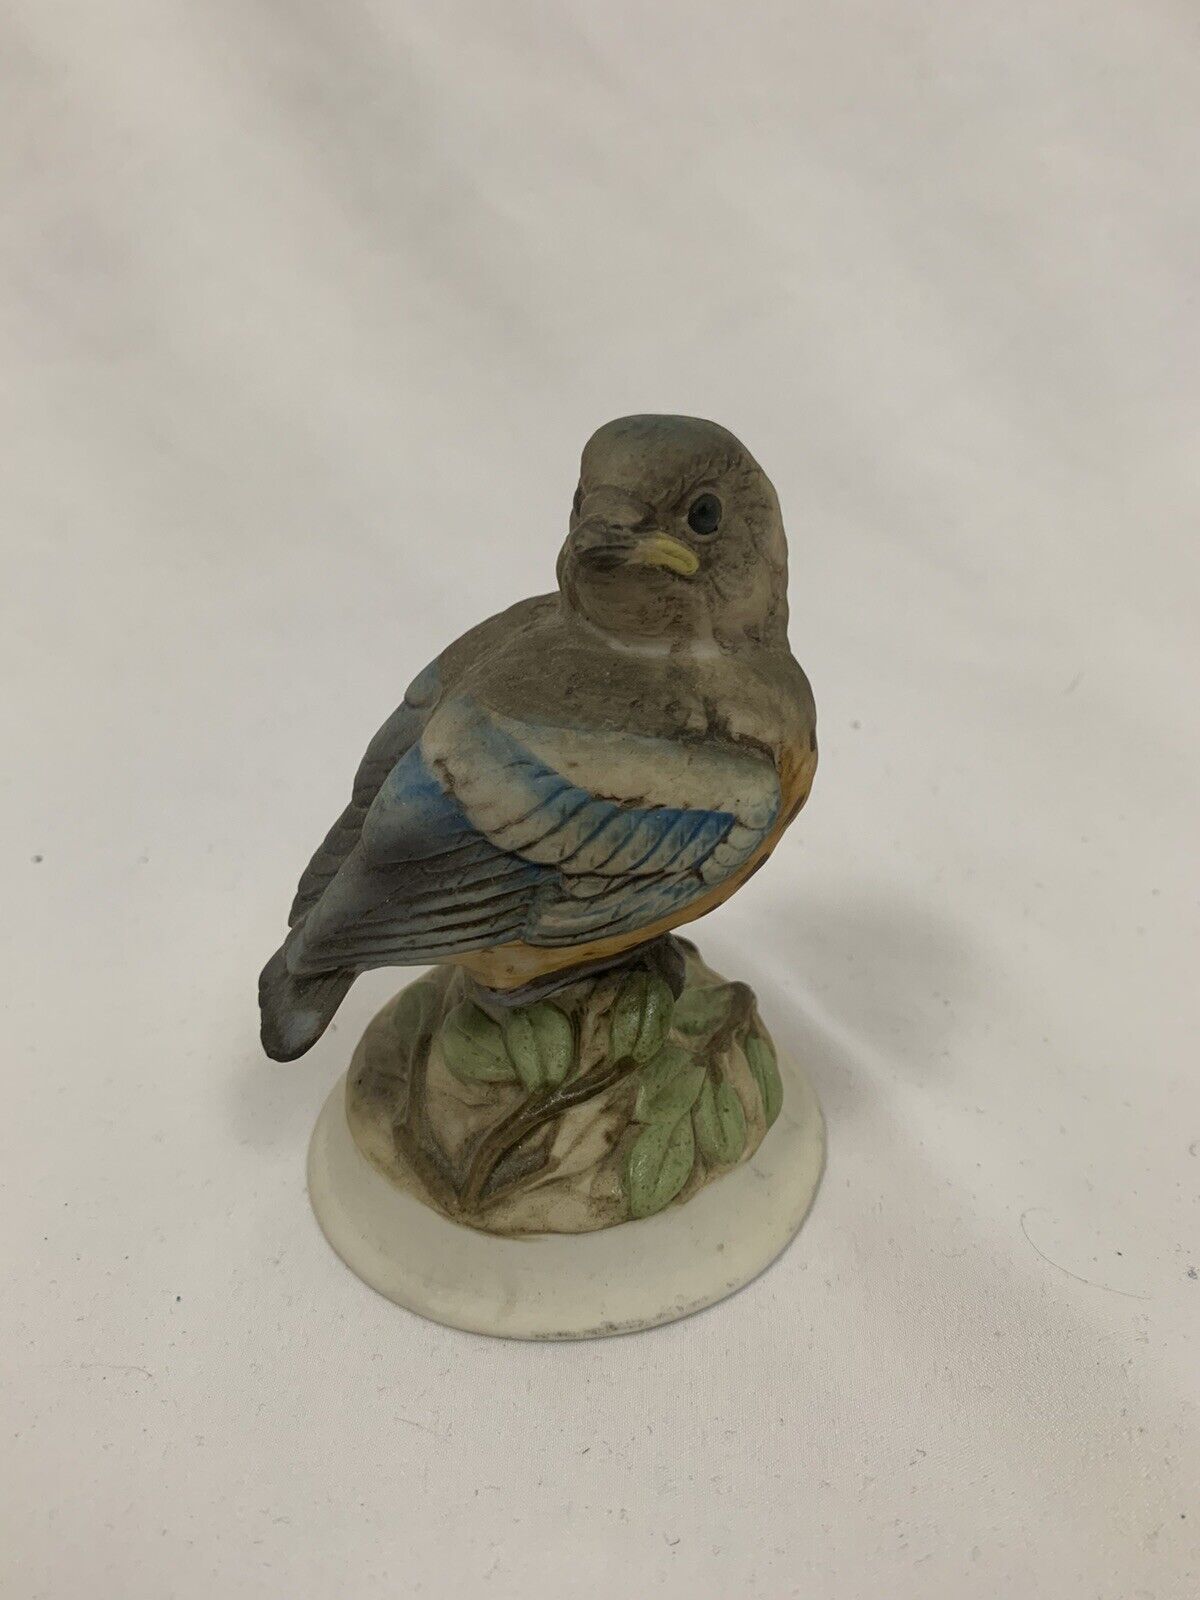 VINTAGE KELVIN'S FINE CHINA HAND PAINTED BLUE BIRD FIGURINE B-743 Collectible